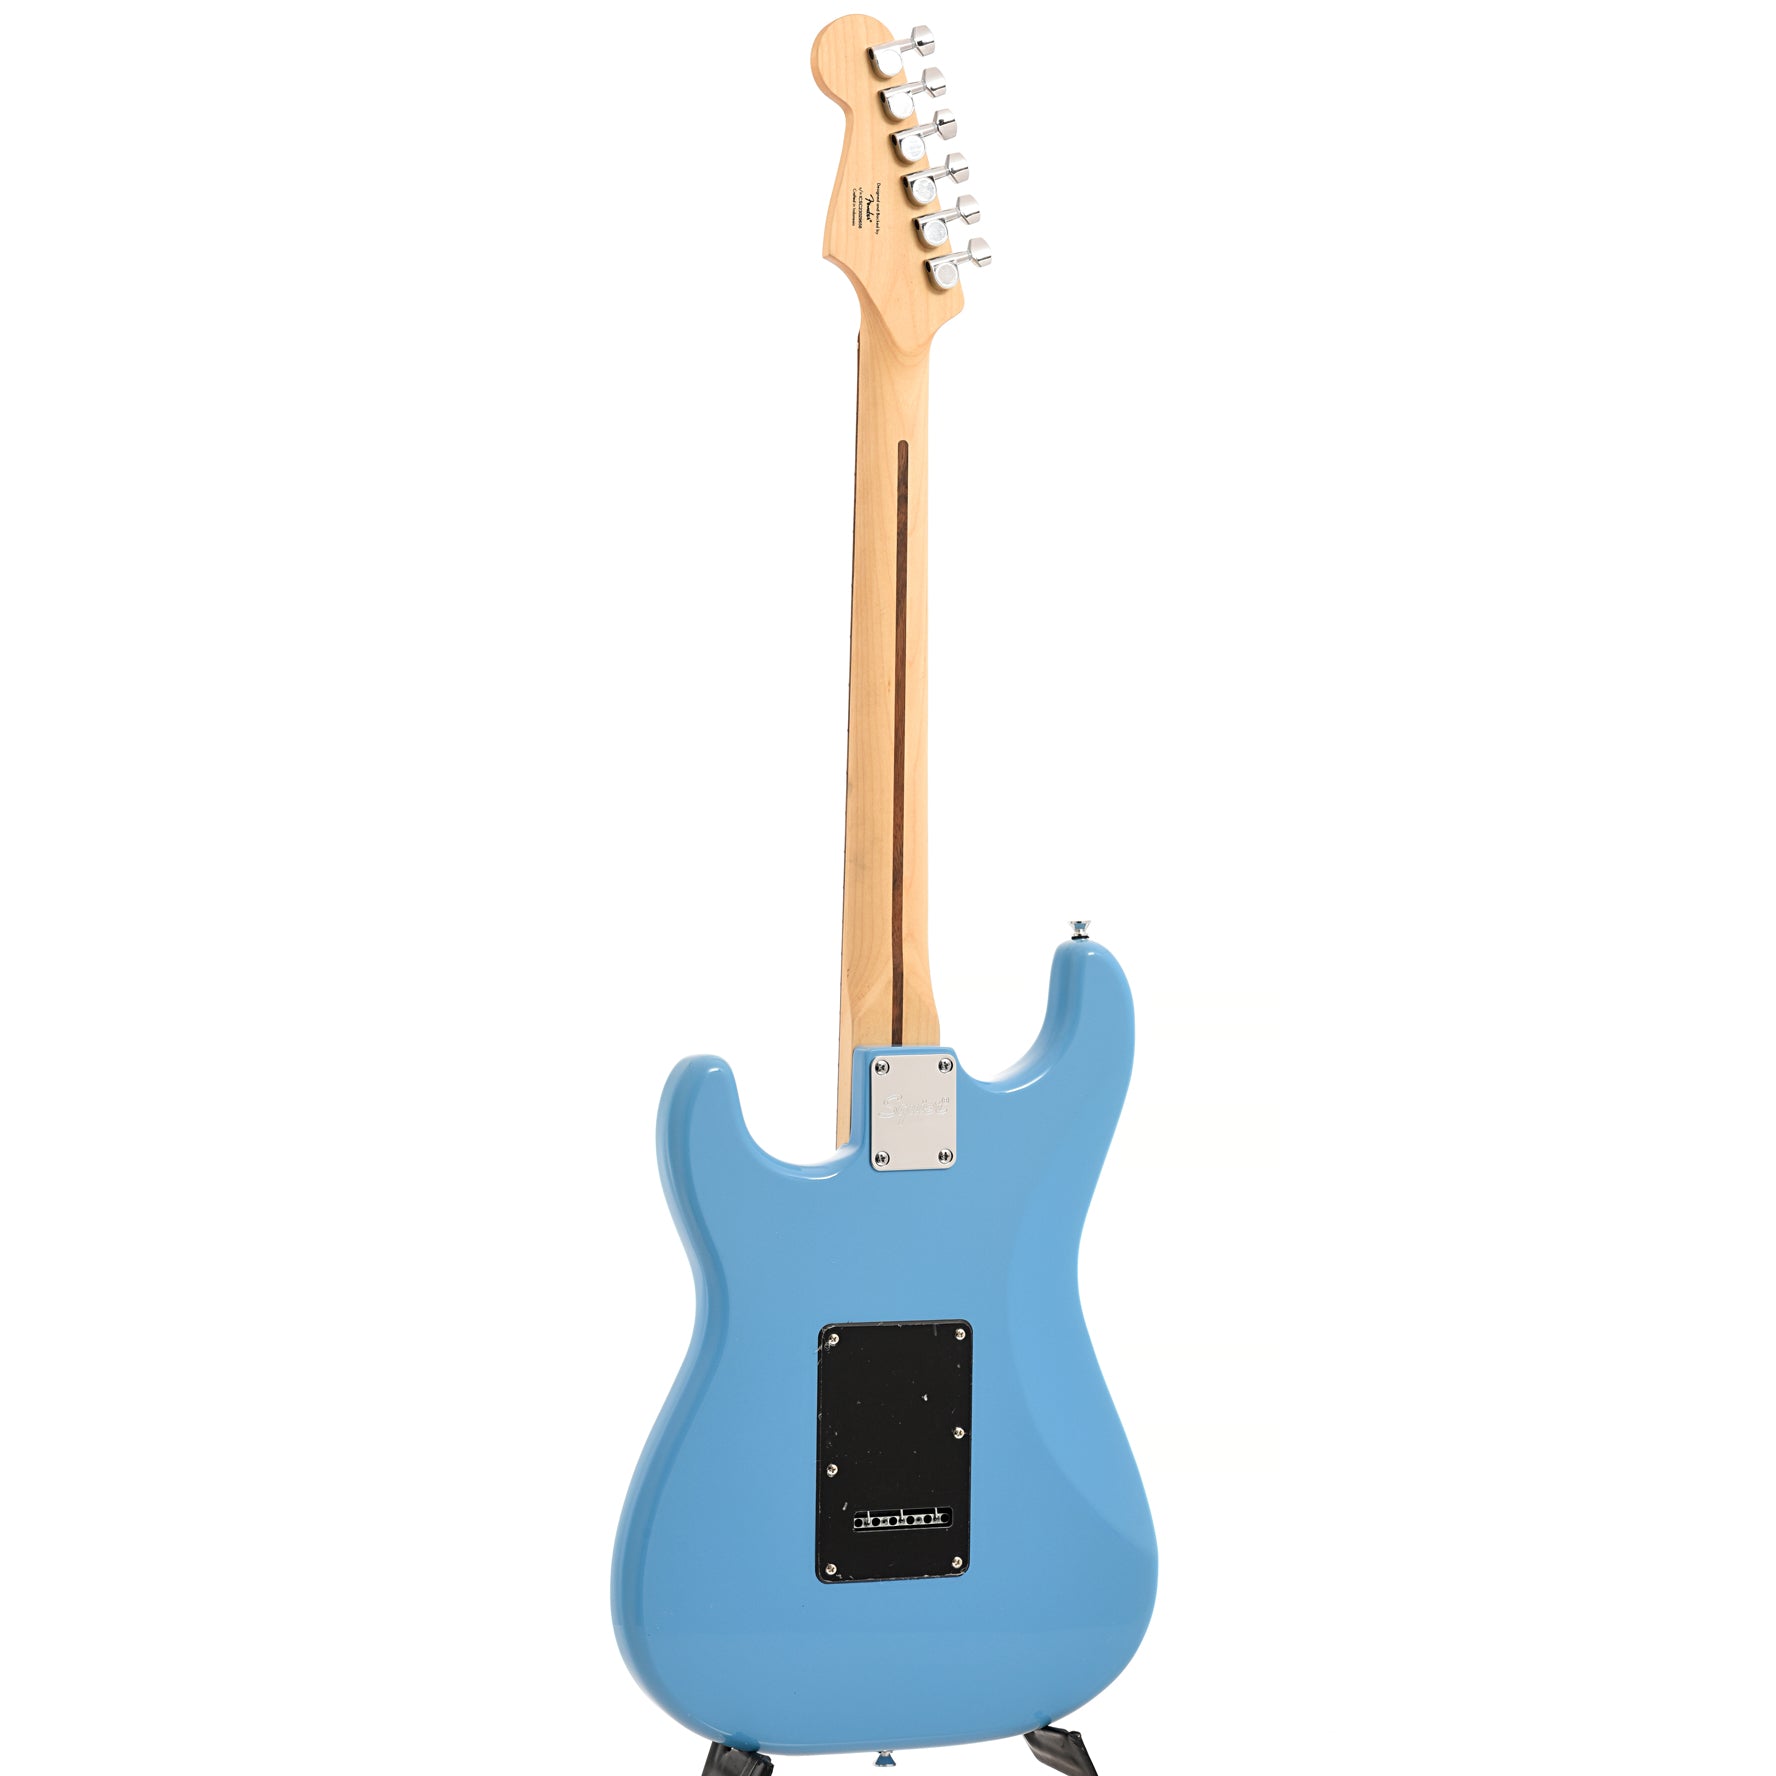 Full back and side of Squier Sonic Stratocaster, California Blue